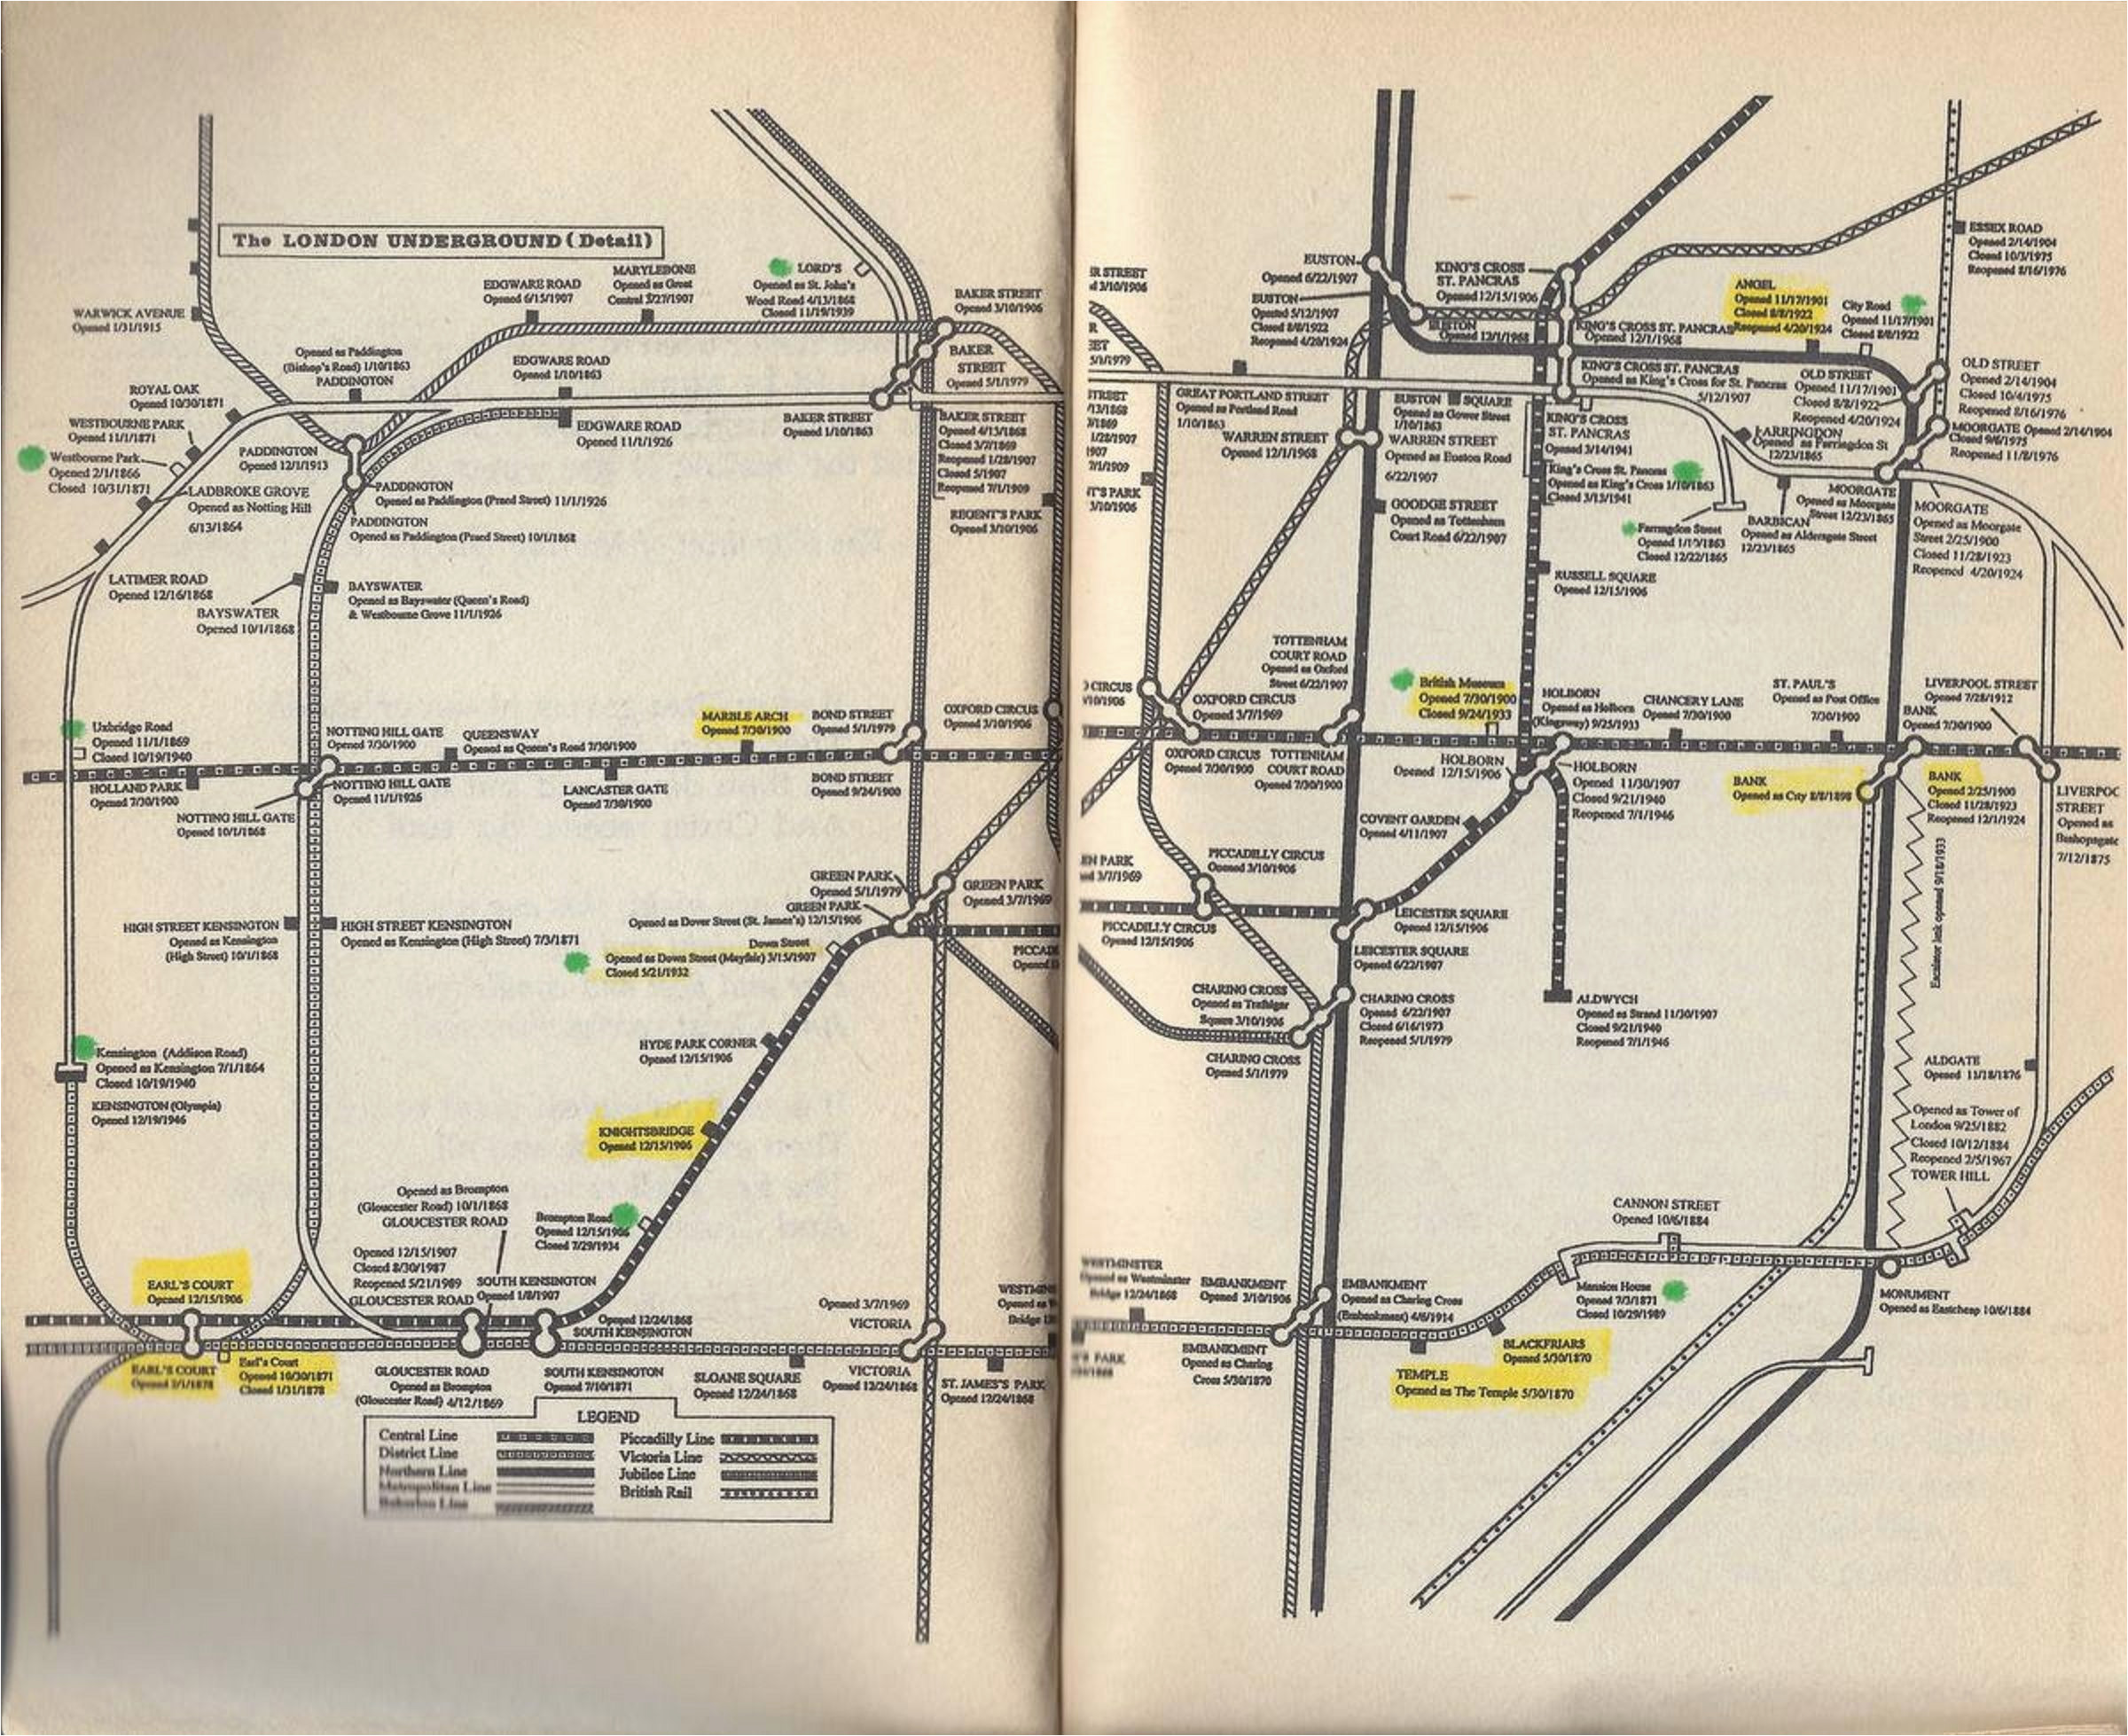 neverwhere s map of the london underground book inspiration in